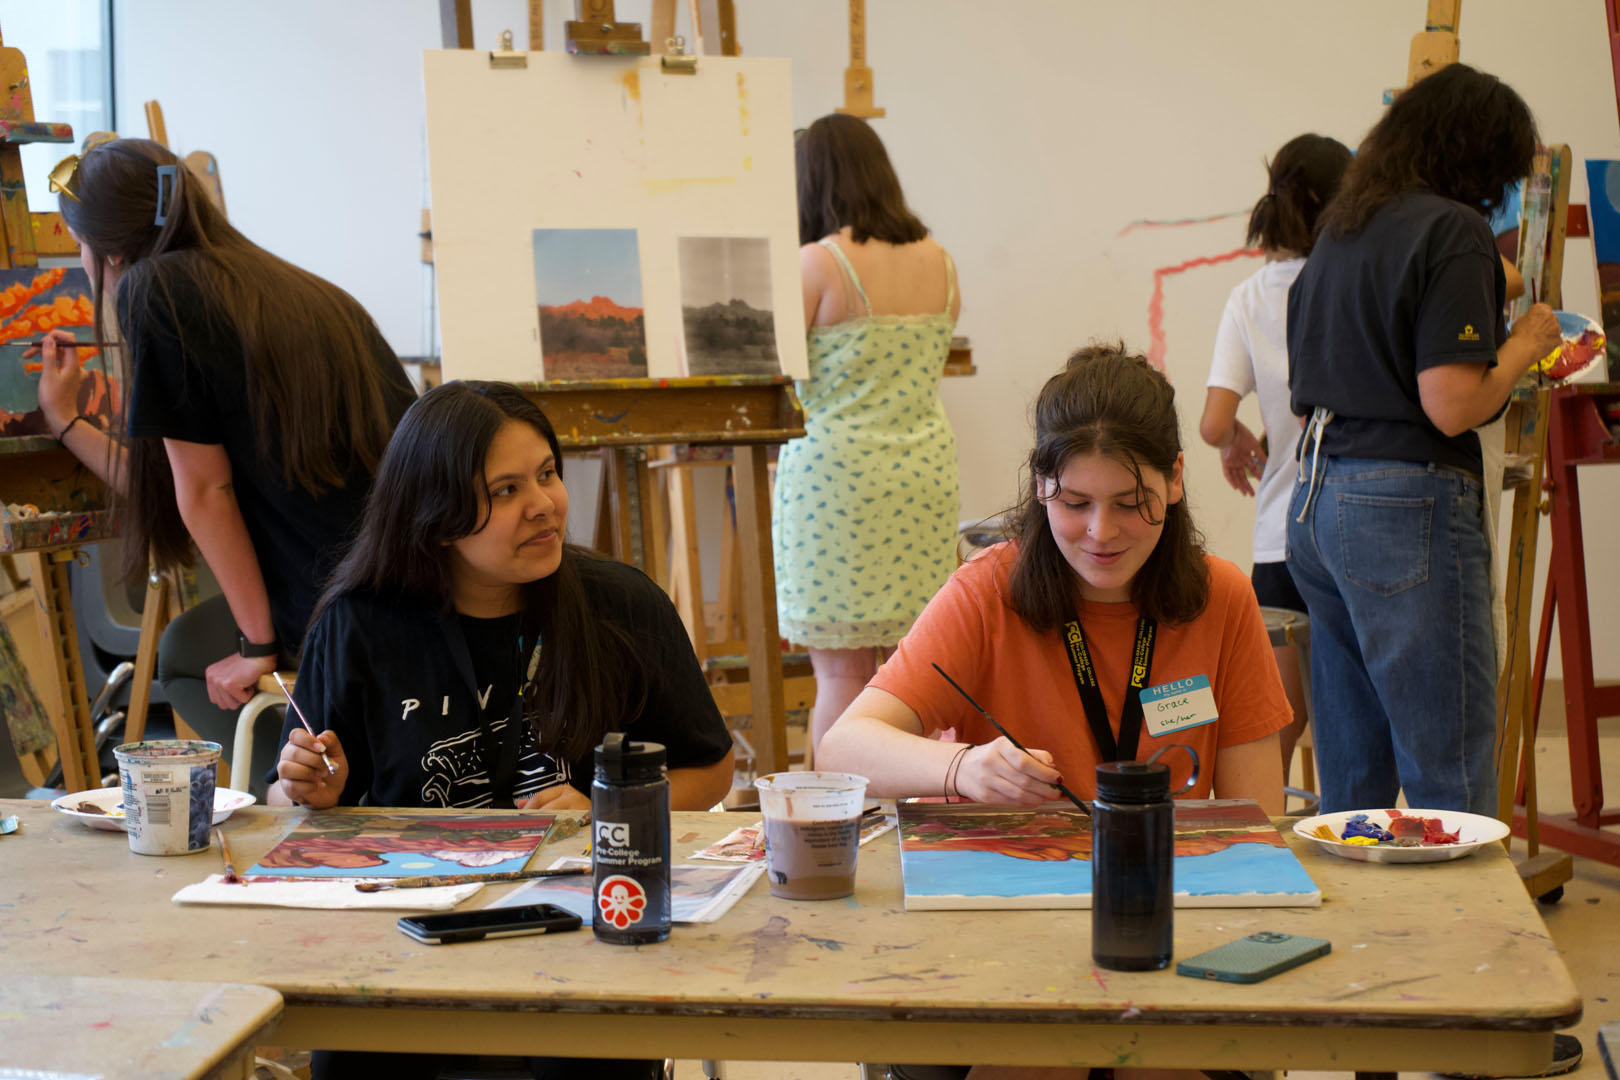 Students participate in a painting class at the Bemis School of Art at Colorado College <span class="cc-gallery-credit">[Matthew Nesstlerodt]</span>